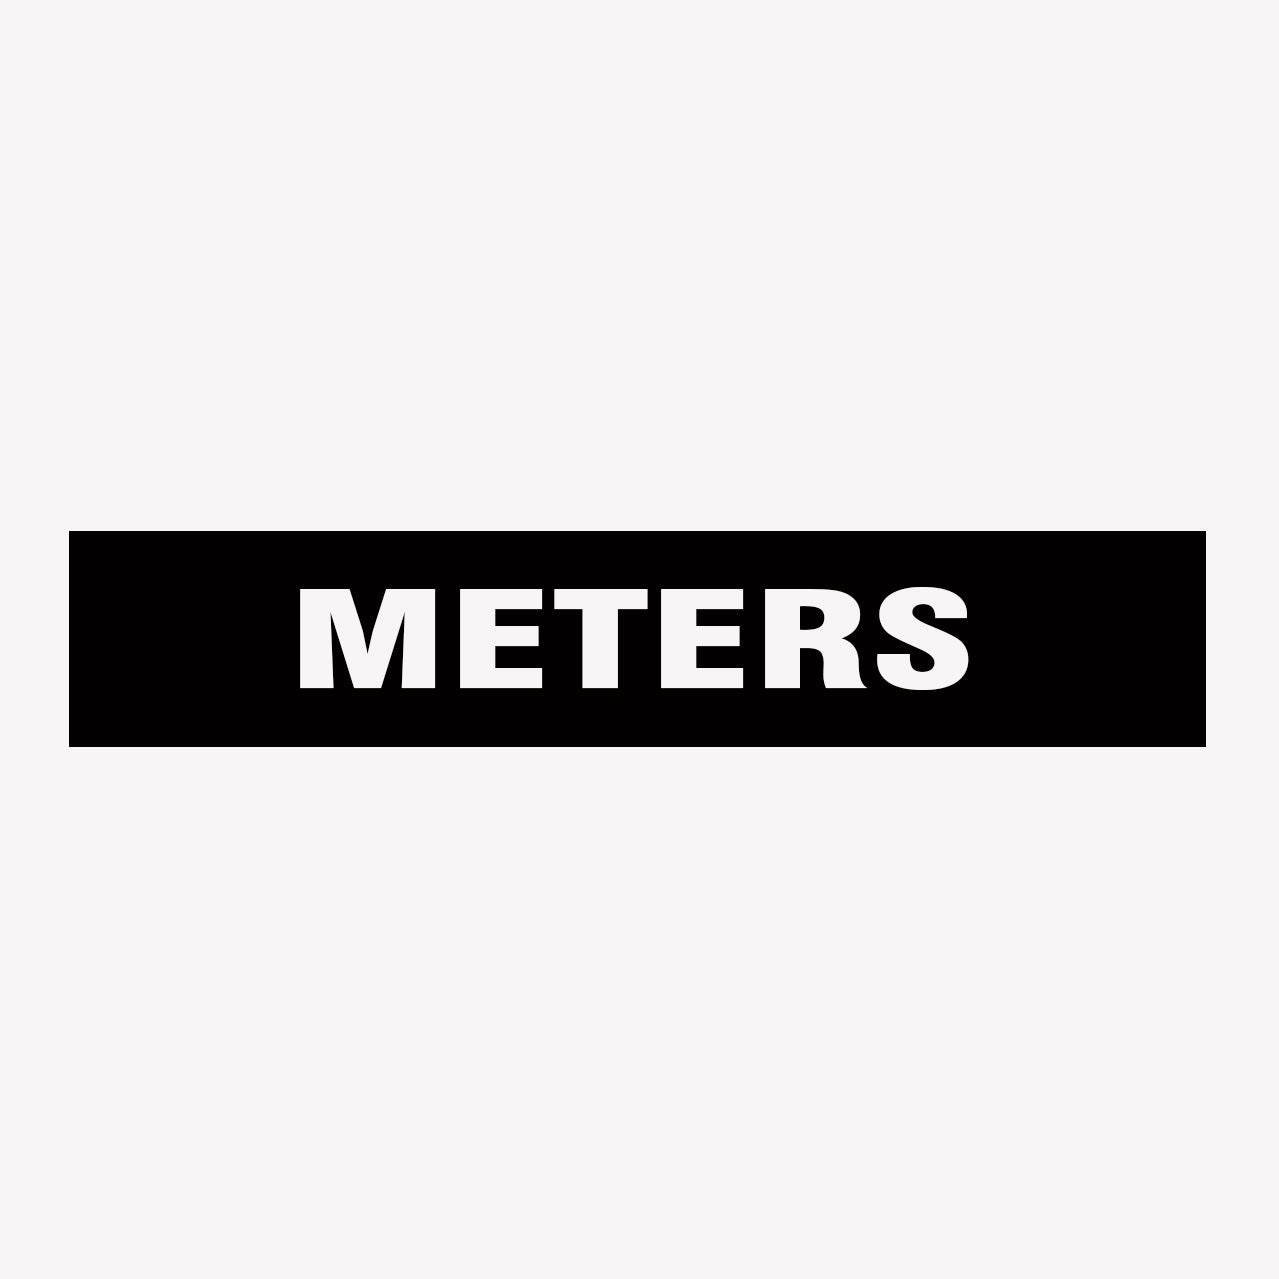 METERS SIGN - STATUTORY SIGNS at GET SIGNS - SHOP ONLINE